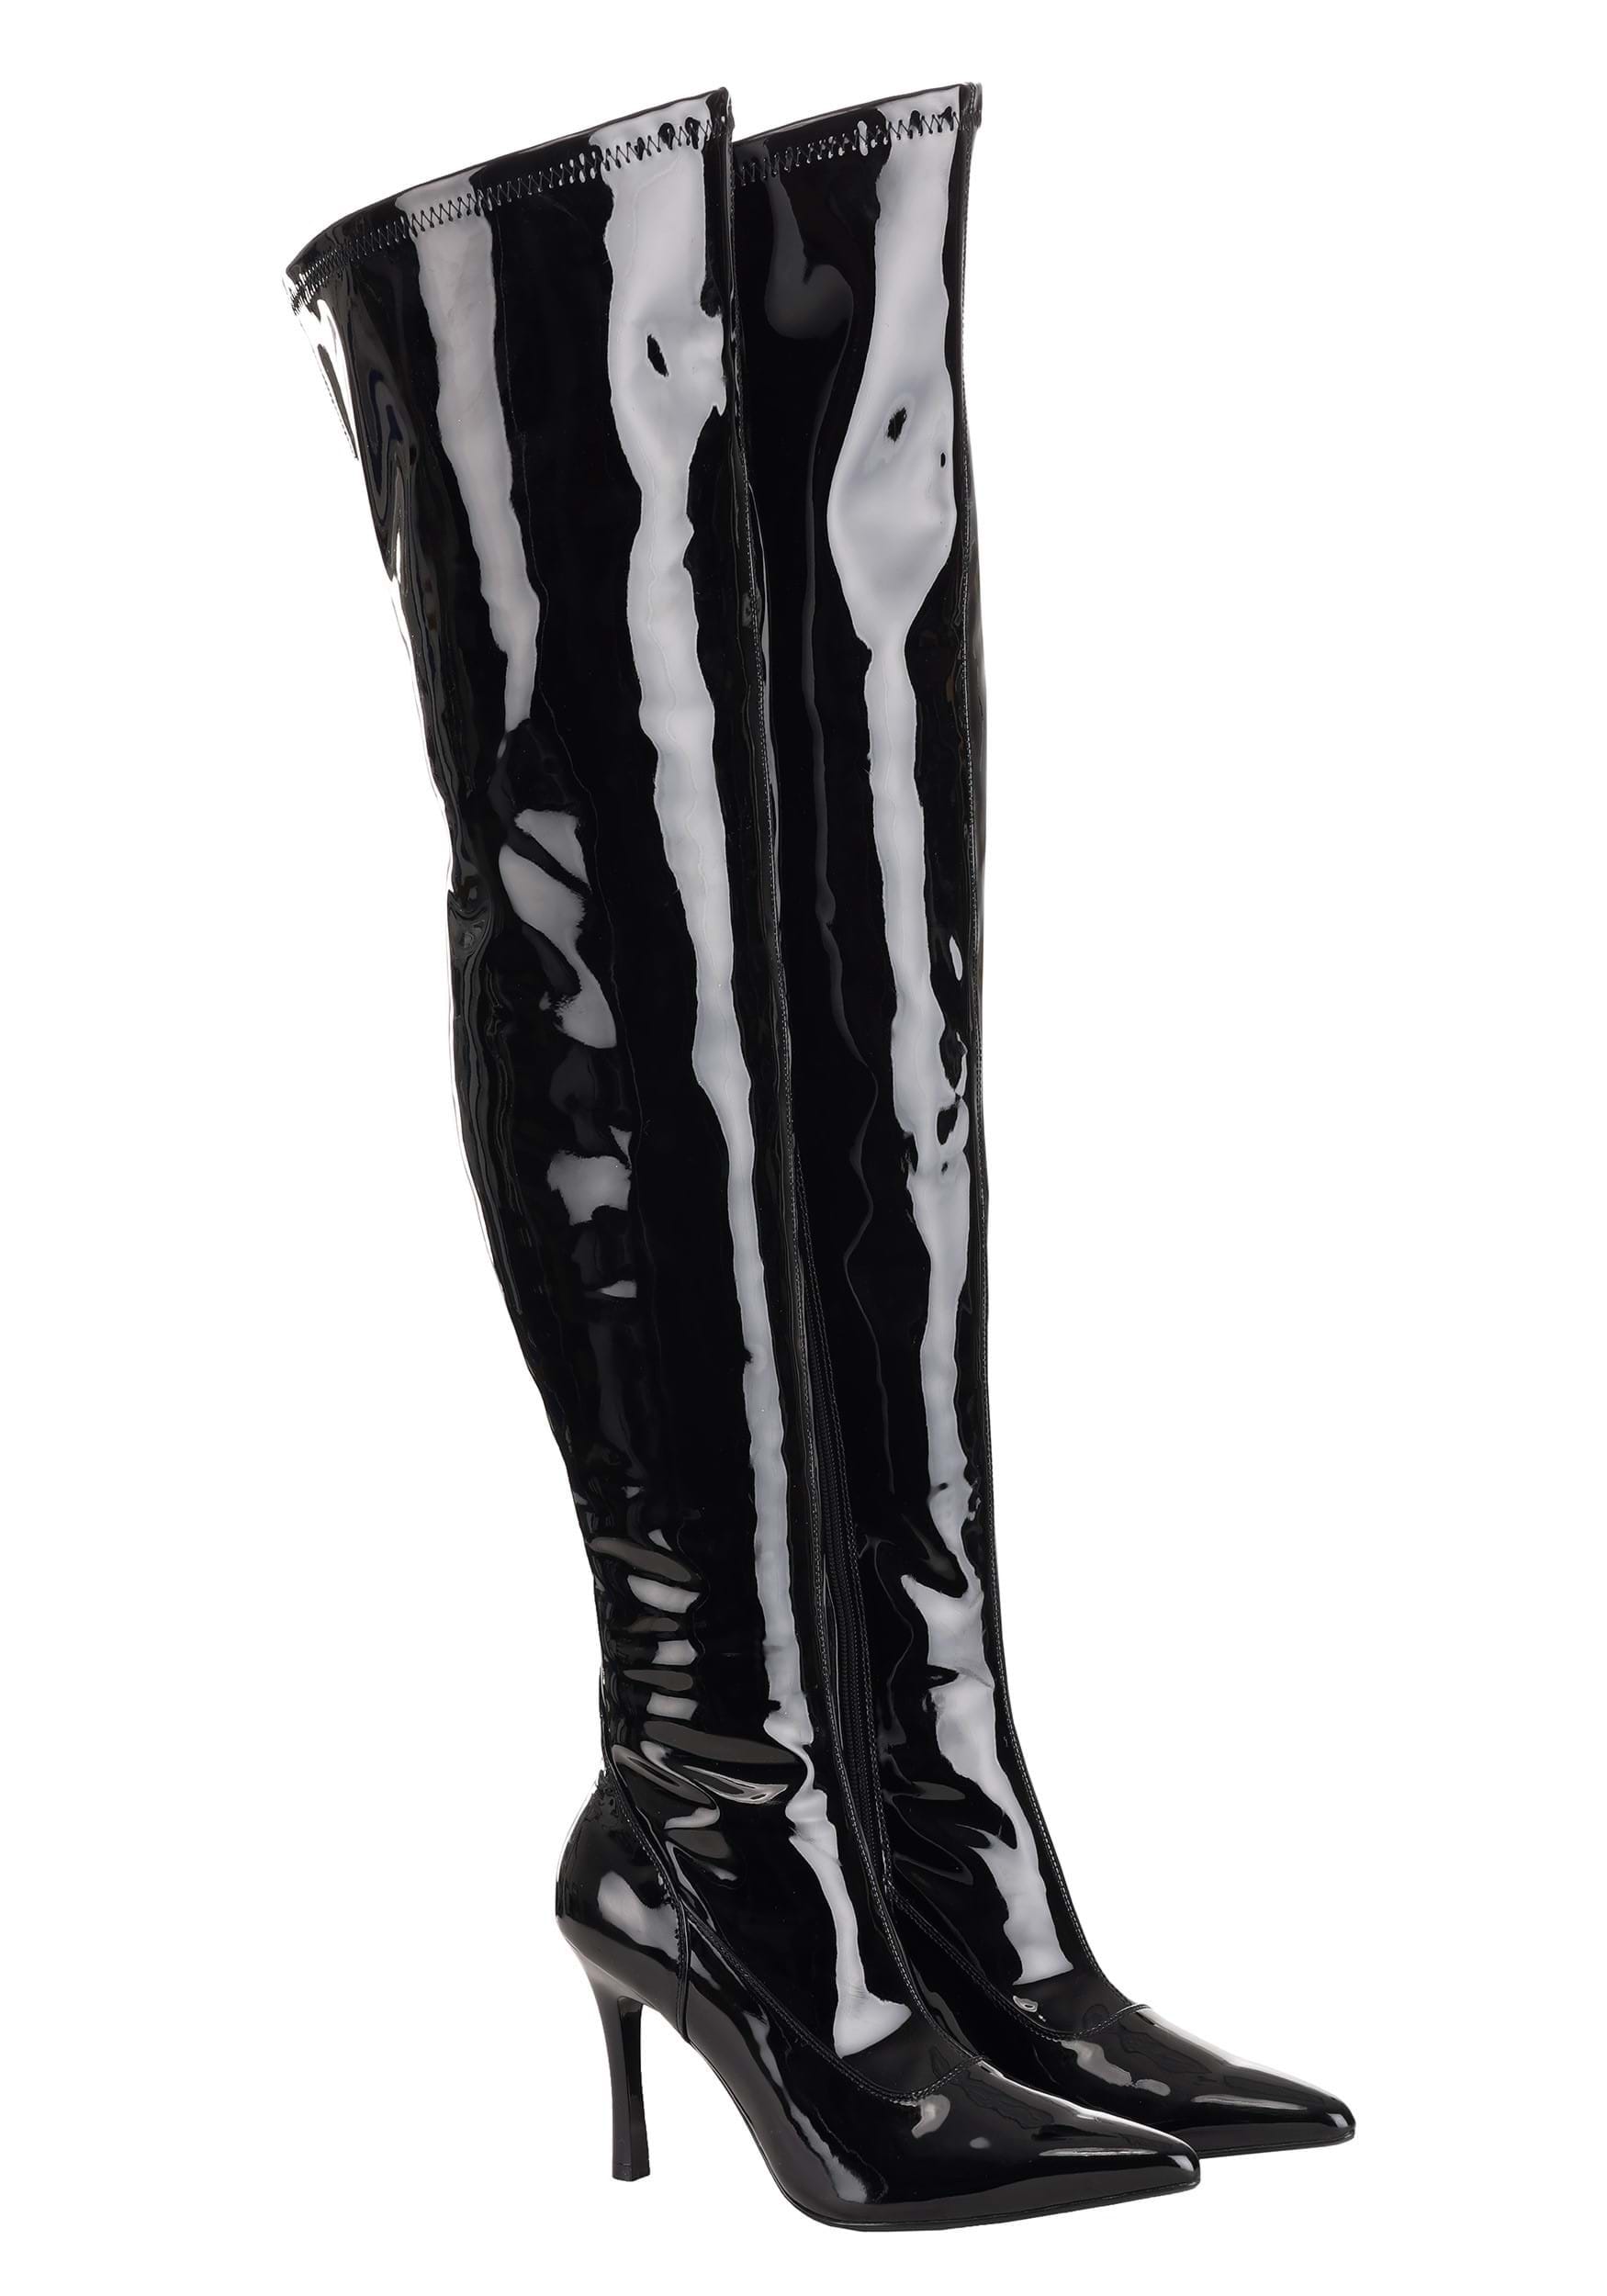 Black Patent Over The Knee Women's Boots